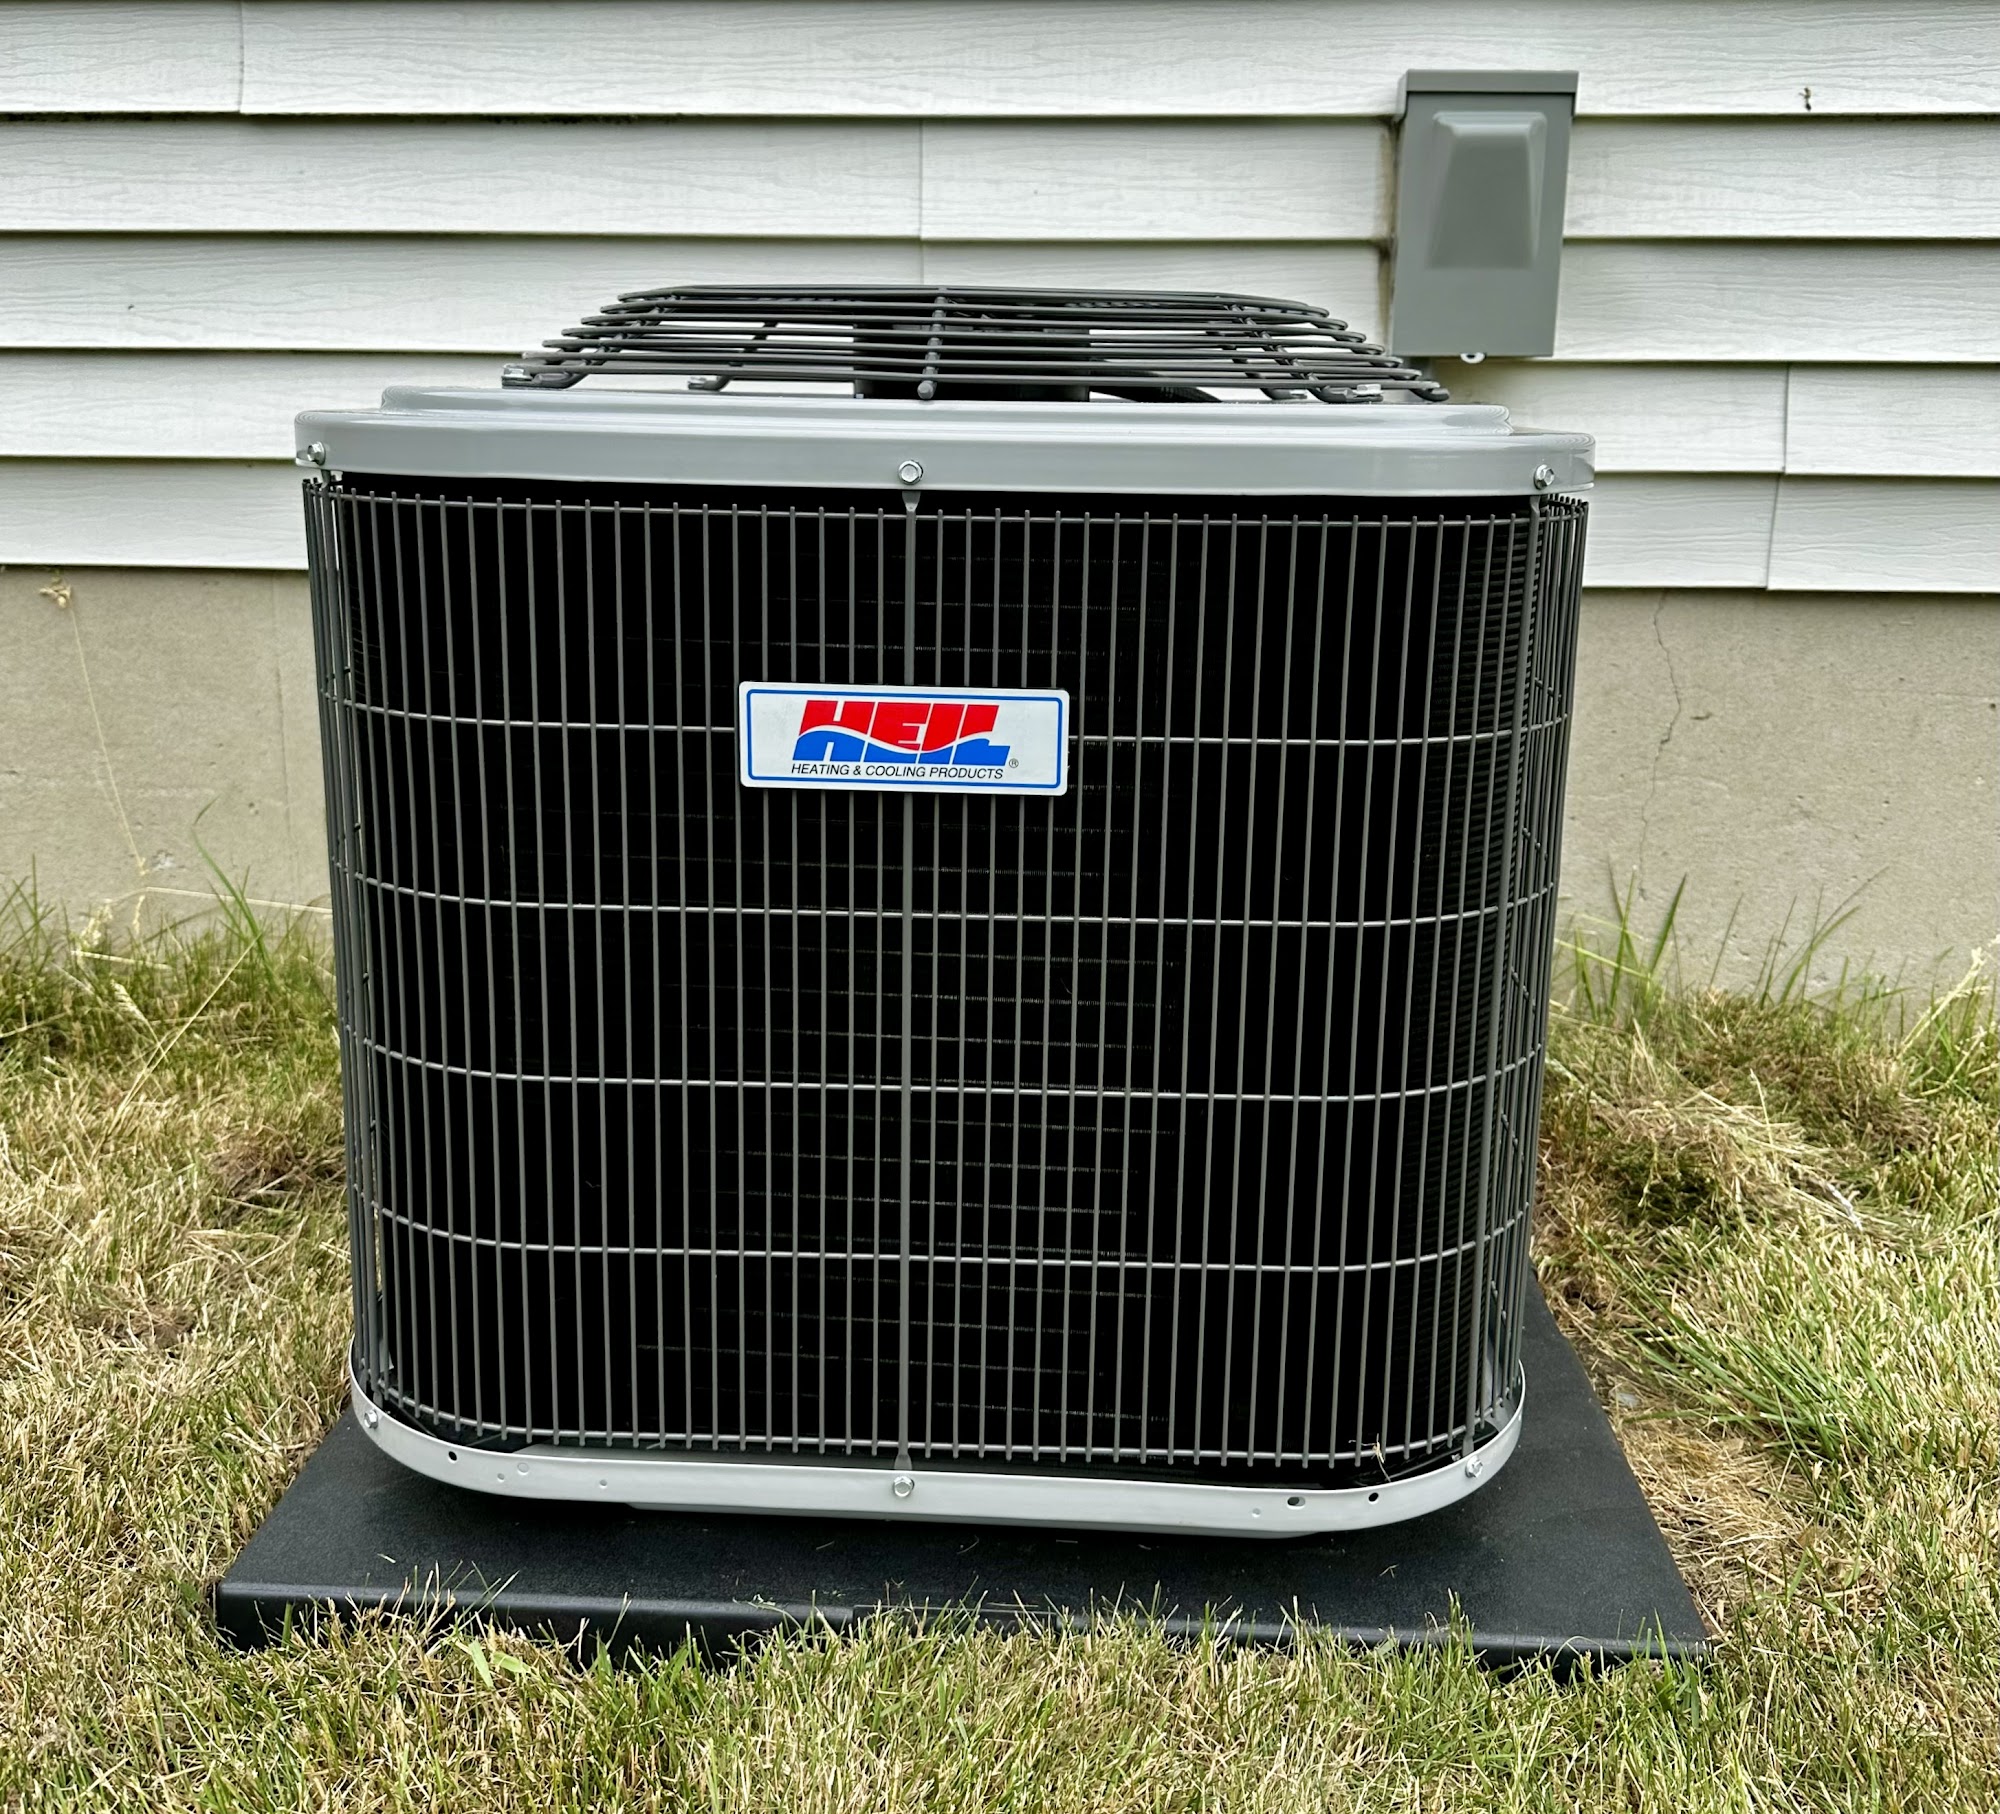 Advanced Technology Heating & Cooling Systems